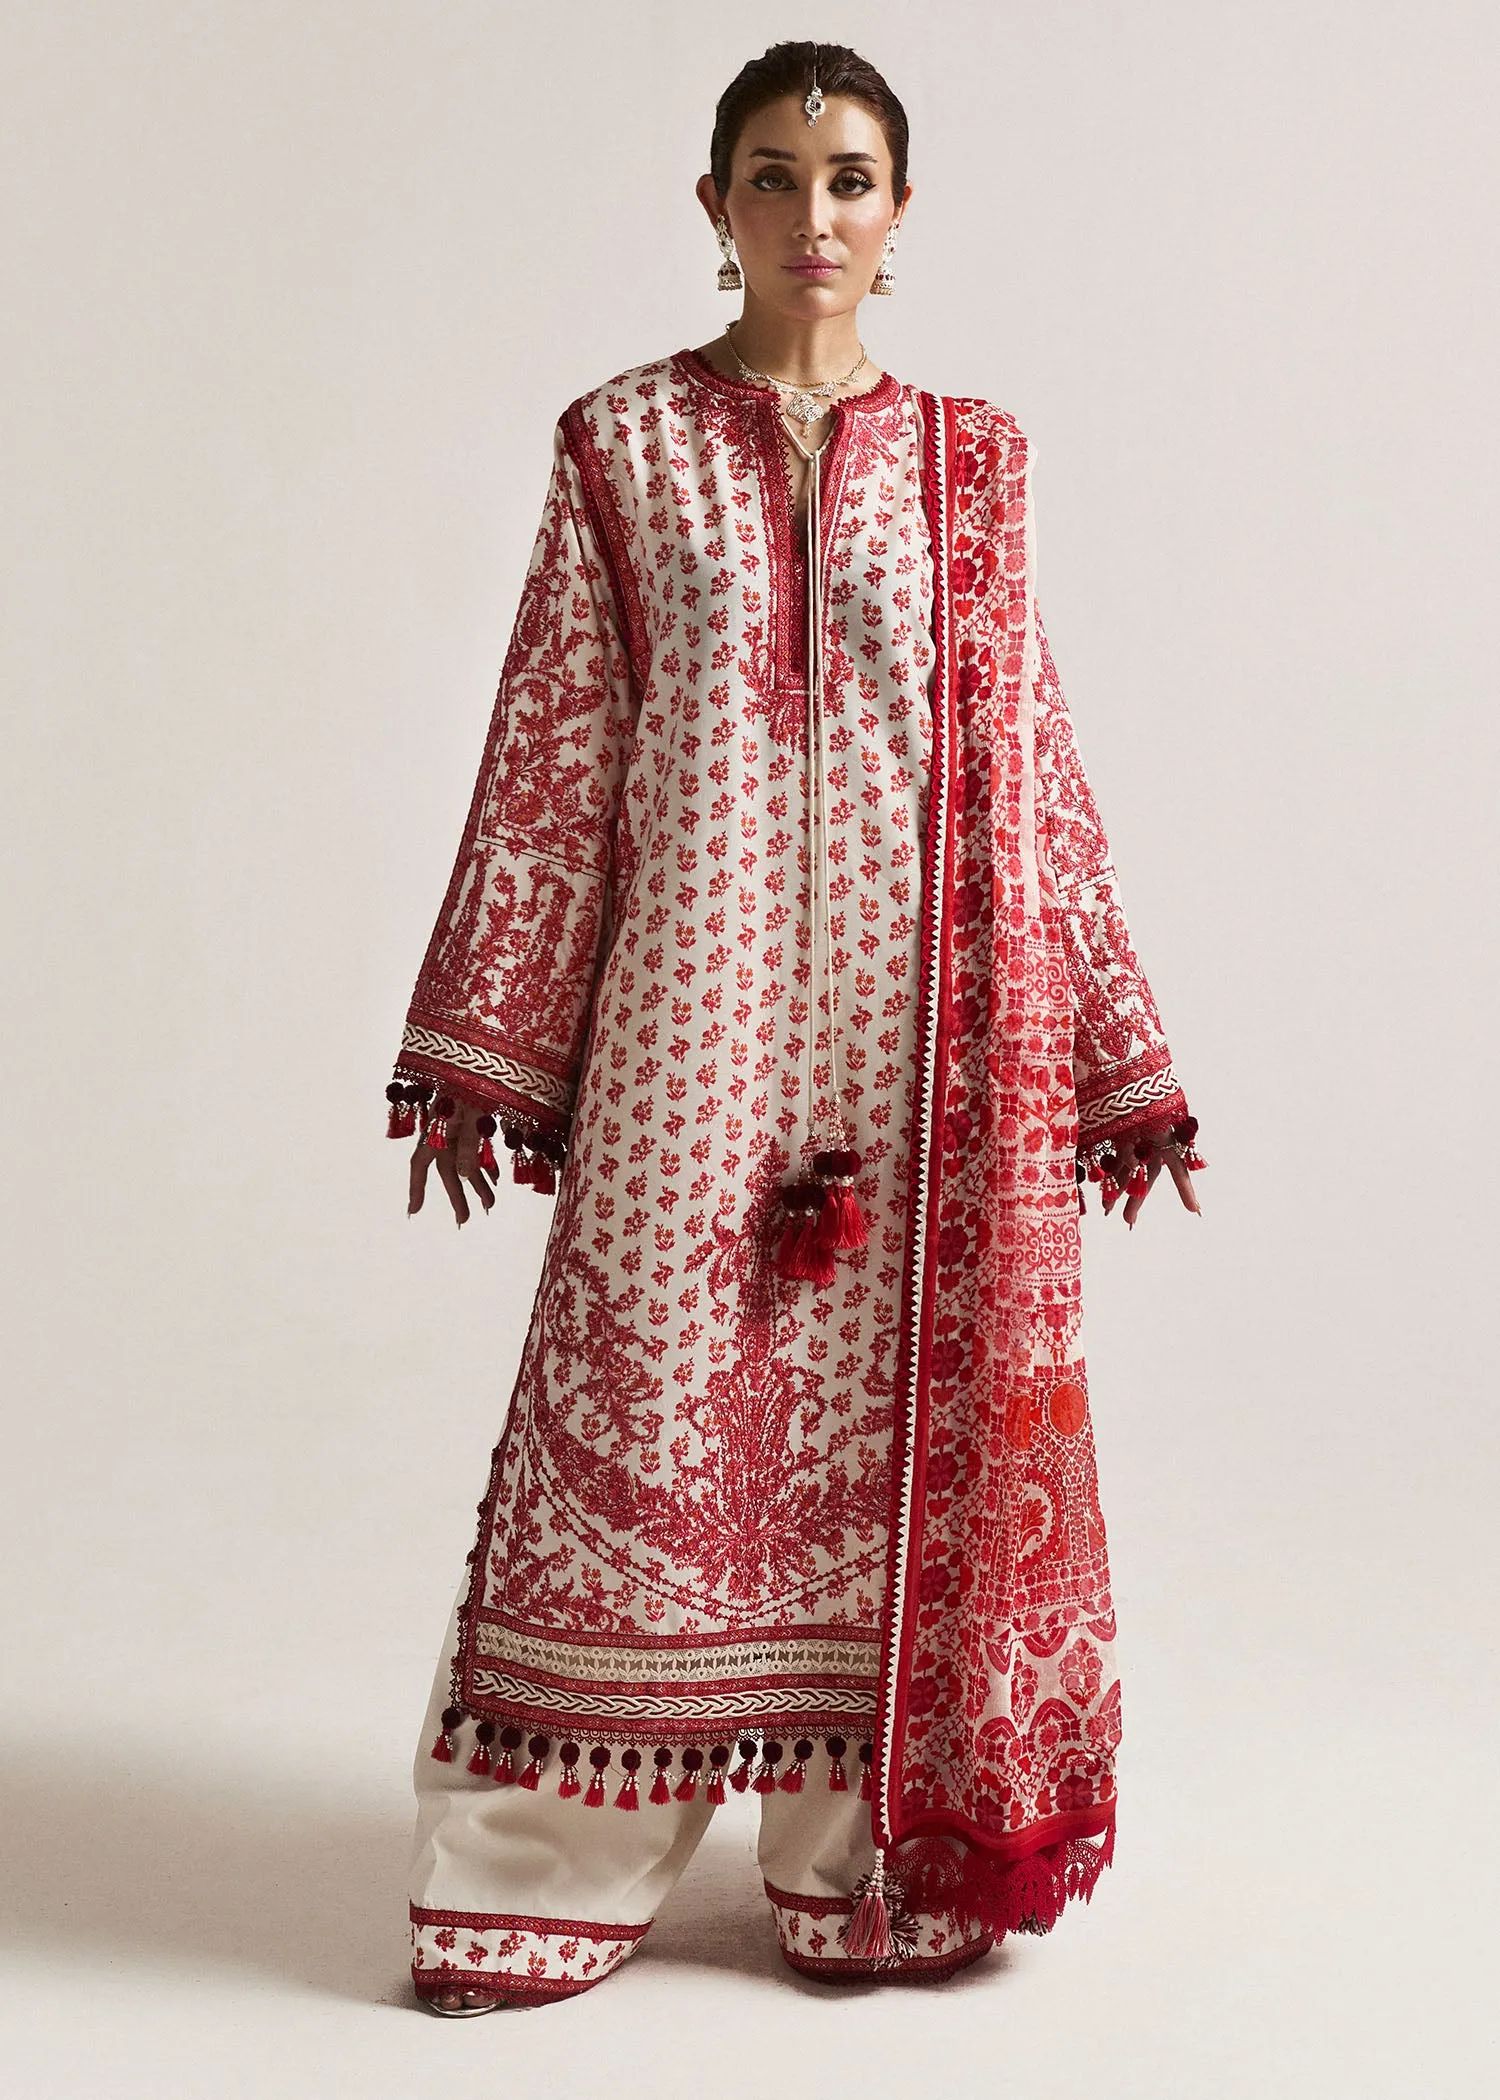 https://pakistanfashiondesigners.co.uk/product/maria-b-embroidered-lawn-suit-mkd-ef24-25/